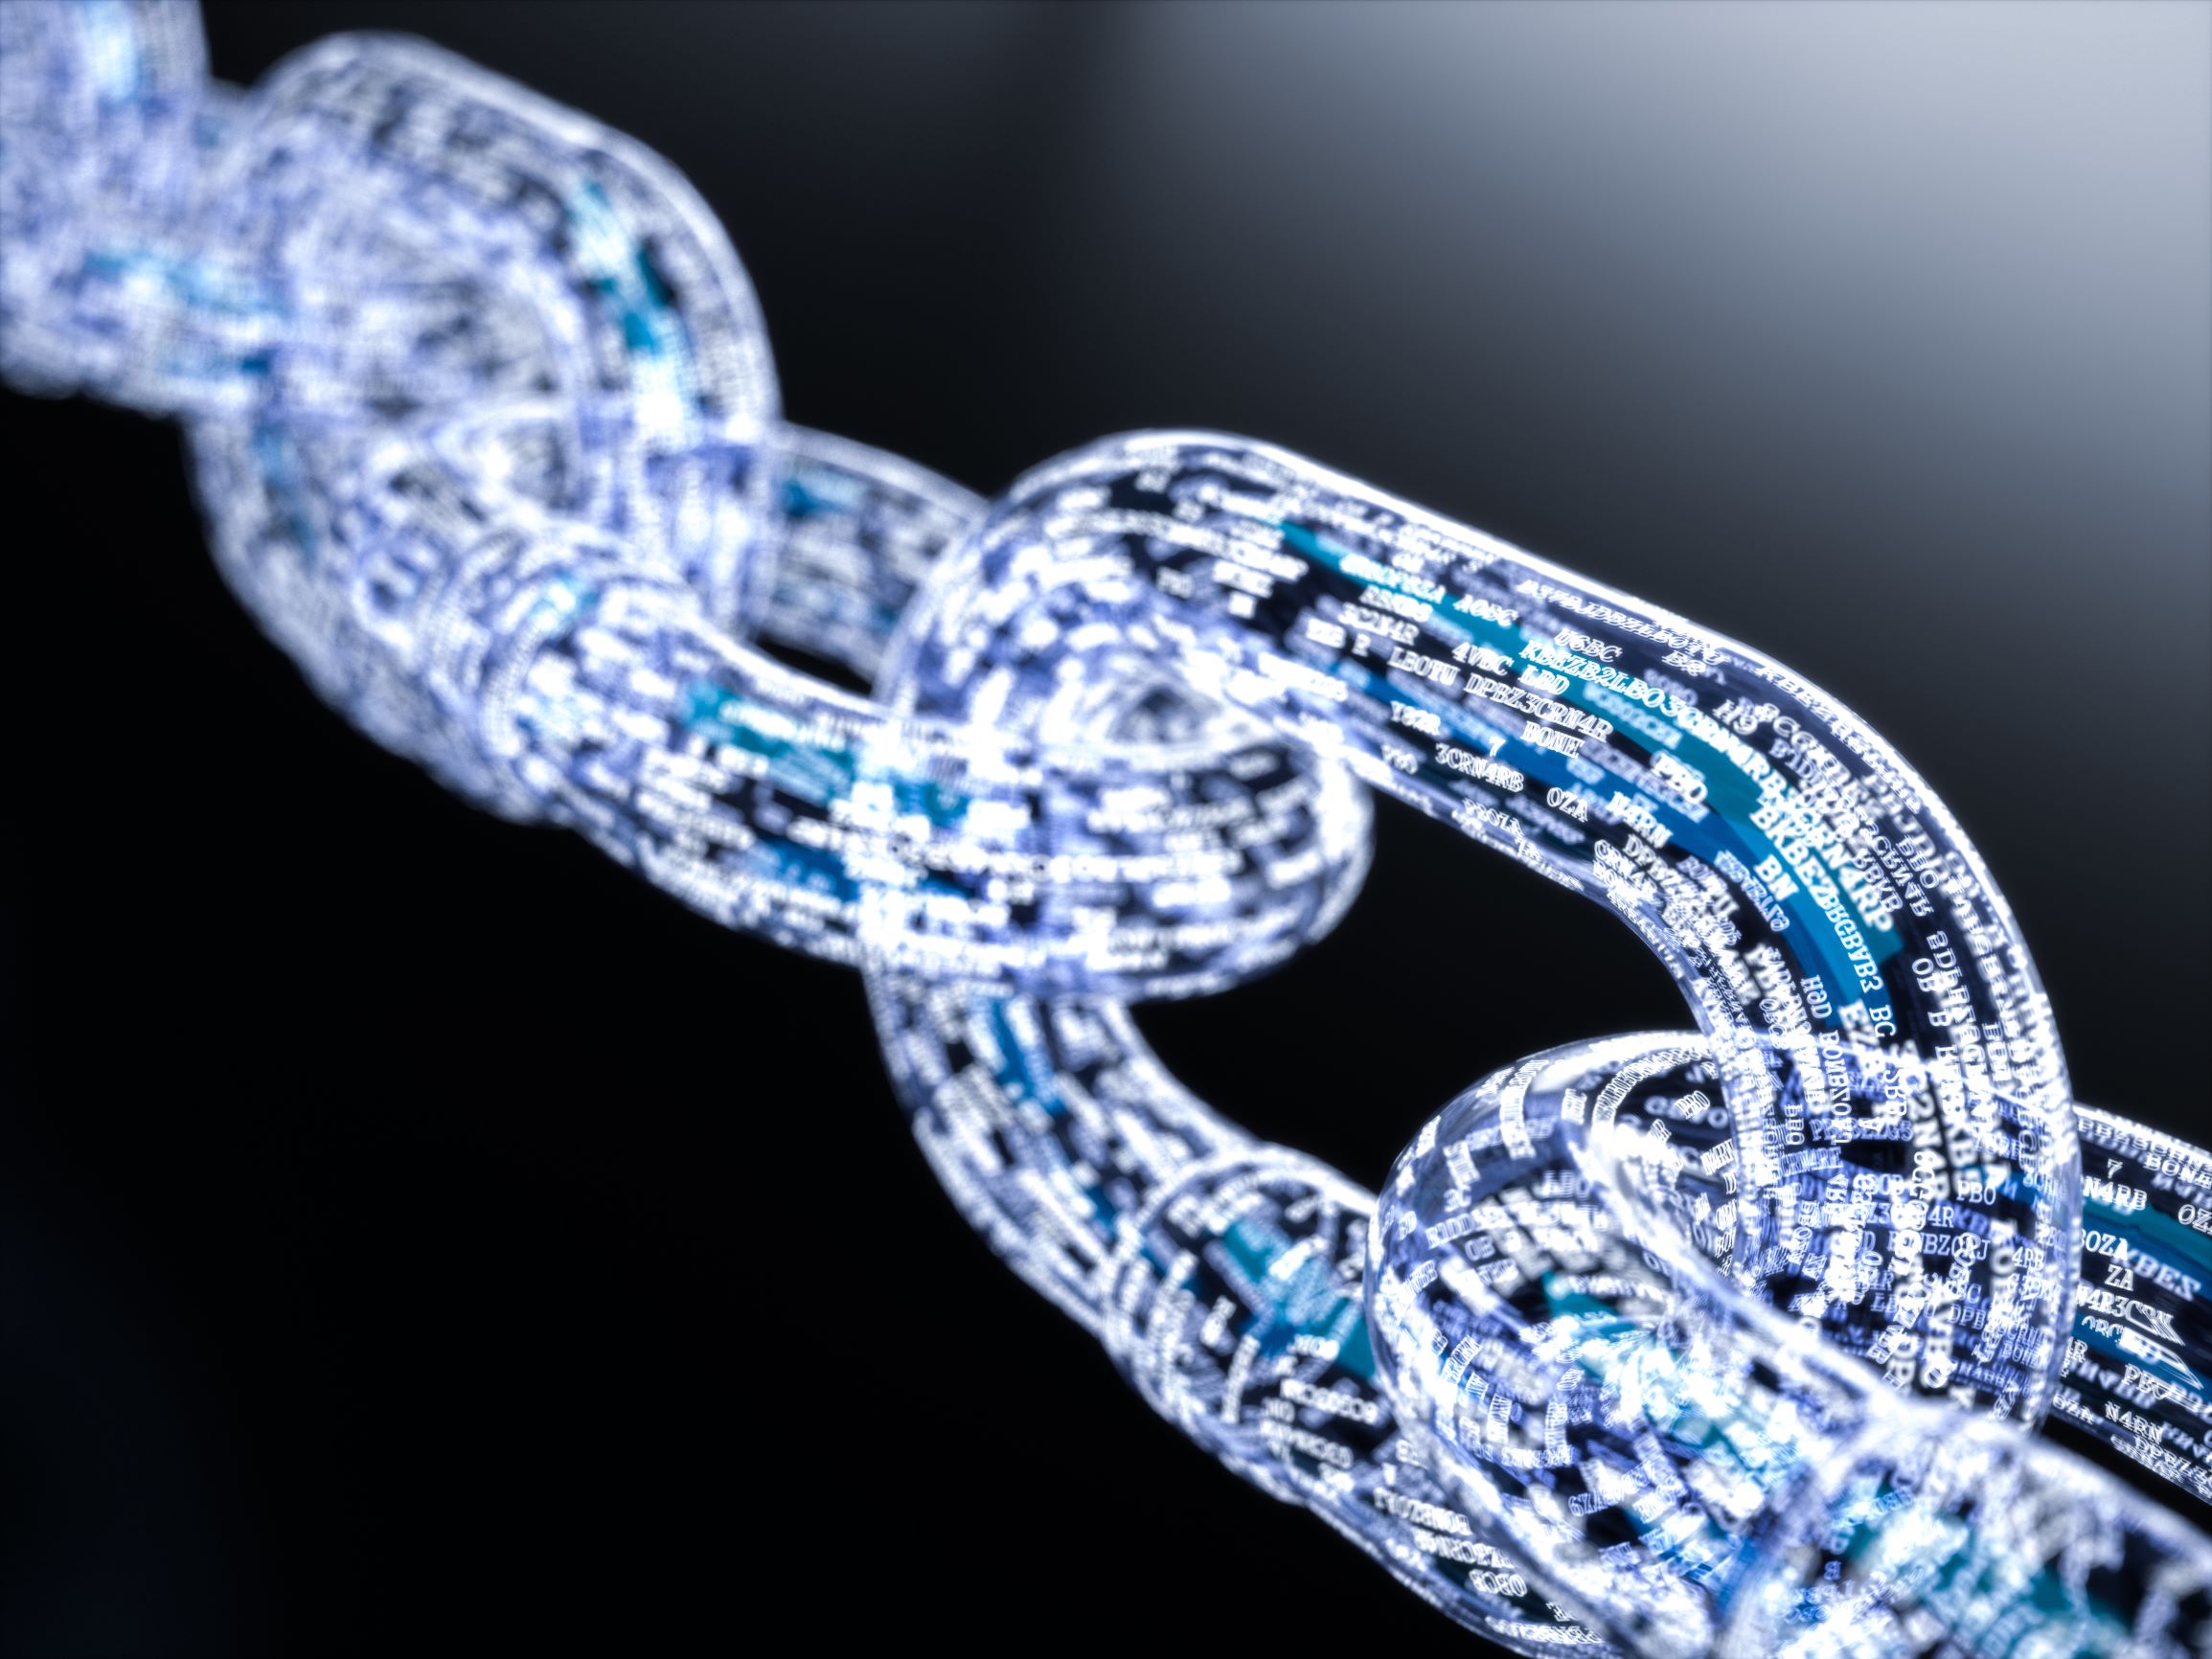 New UPU study decodes blockchain’s benefits for the Post